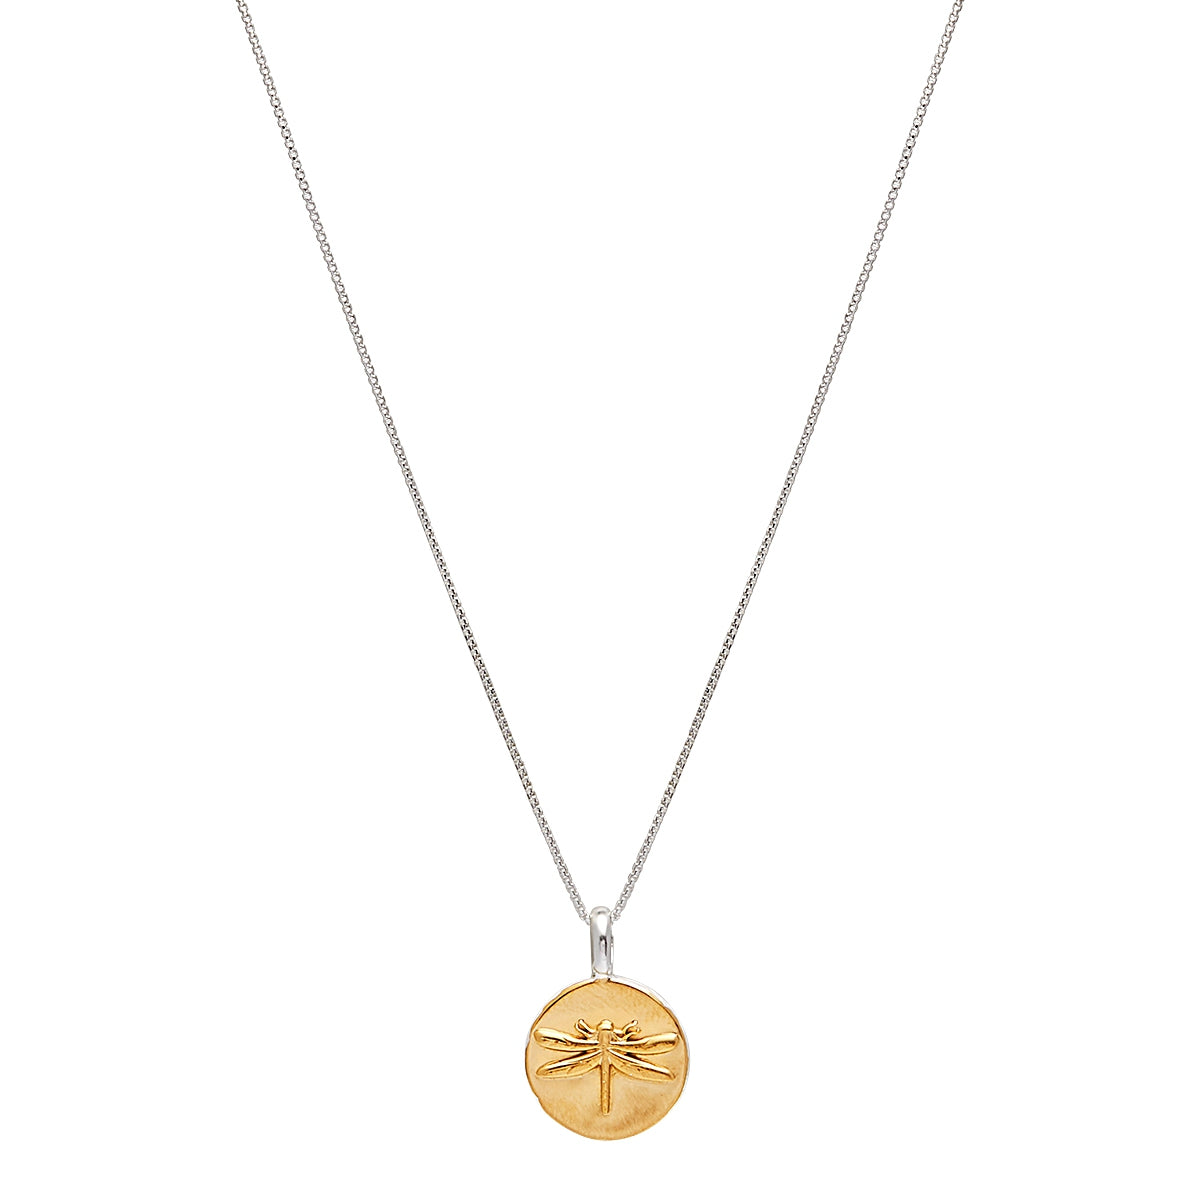 Najo Sterling Silver Chain & Rose Gold Plated Disc Pendant